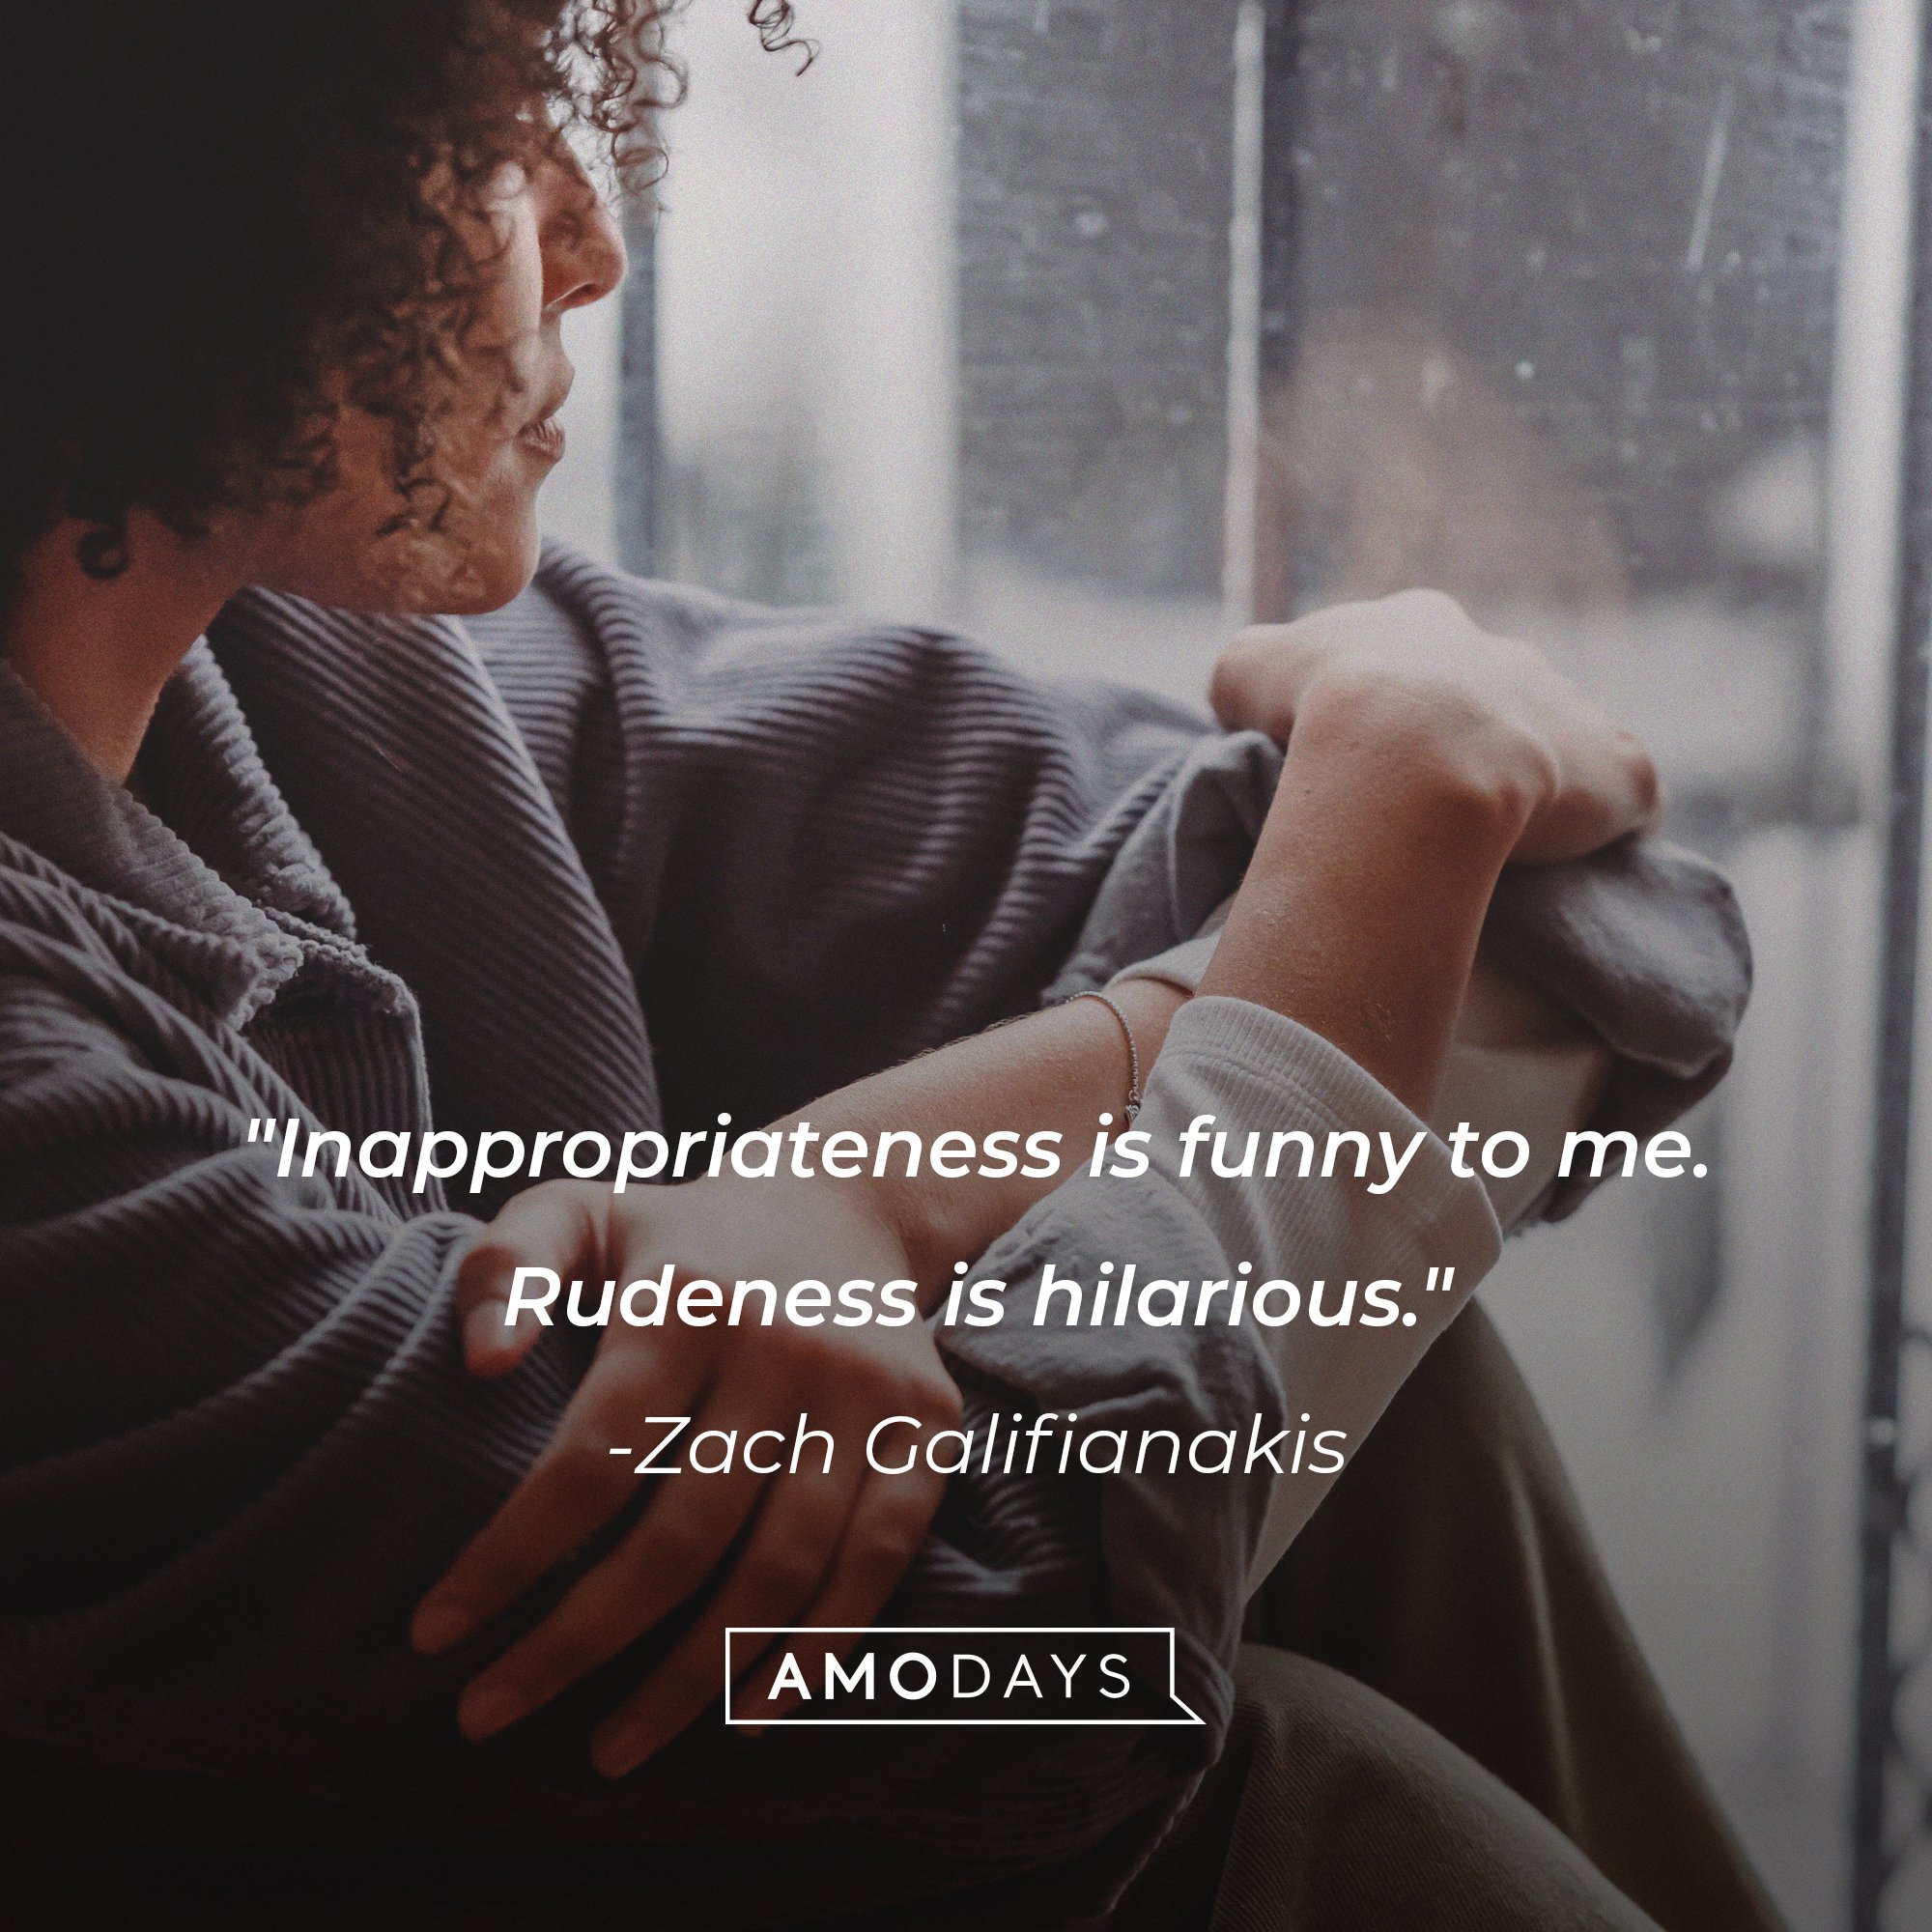 Zach Galifianakis’ quote: "Inappropriateness is funny to me. Rudeness is hilarious." | Image: AmoDays